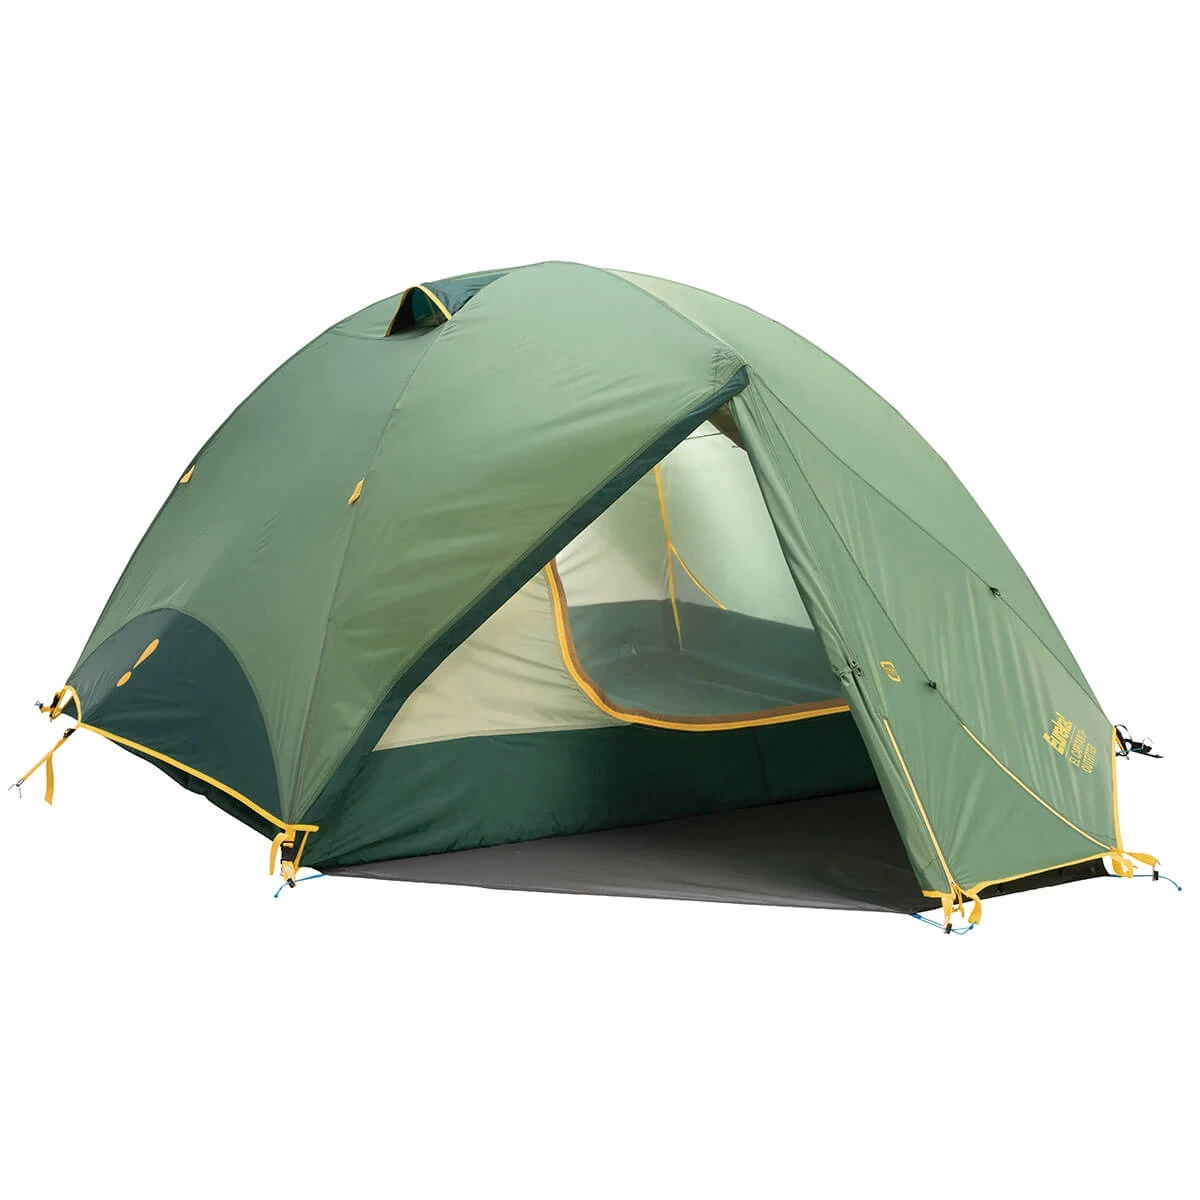 Eureka! El Capitan Outfitter Tent with rainfly and floorprint